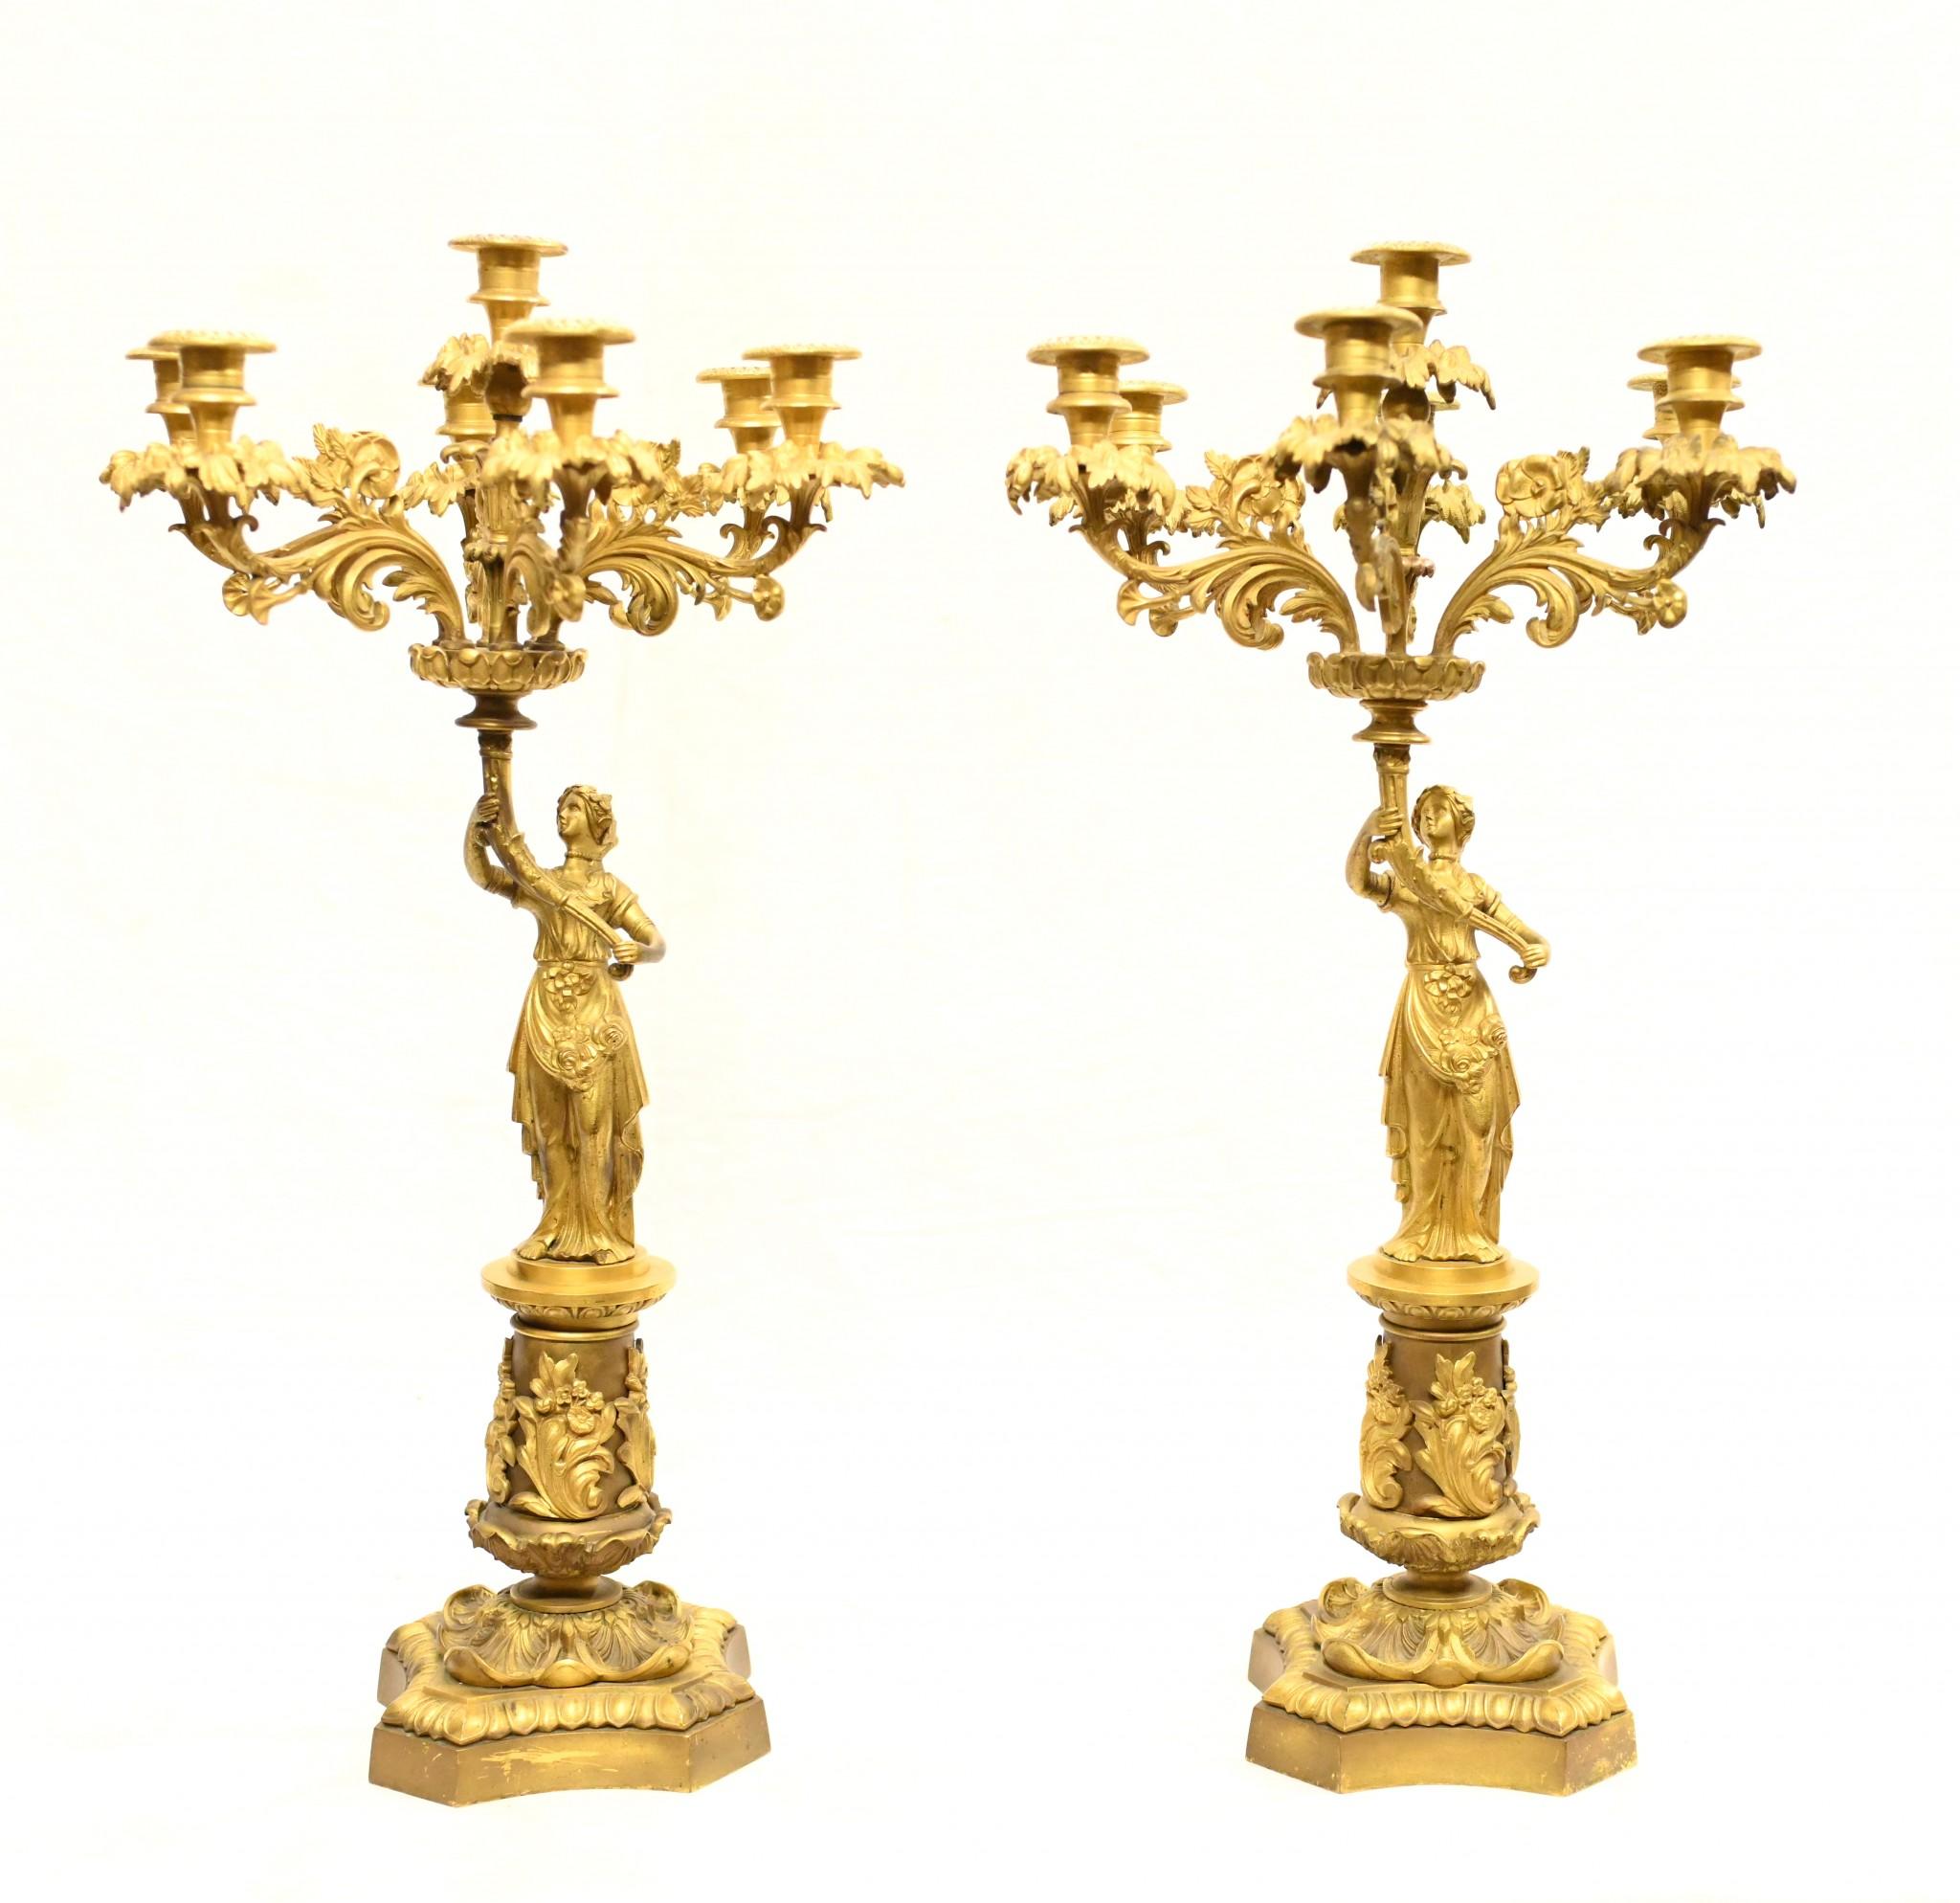 Pair French Ormolu Candelabras Maiden Antique 1880 In Good Condition For Sale In Potters Bar, GB